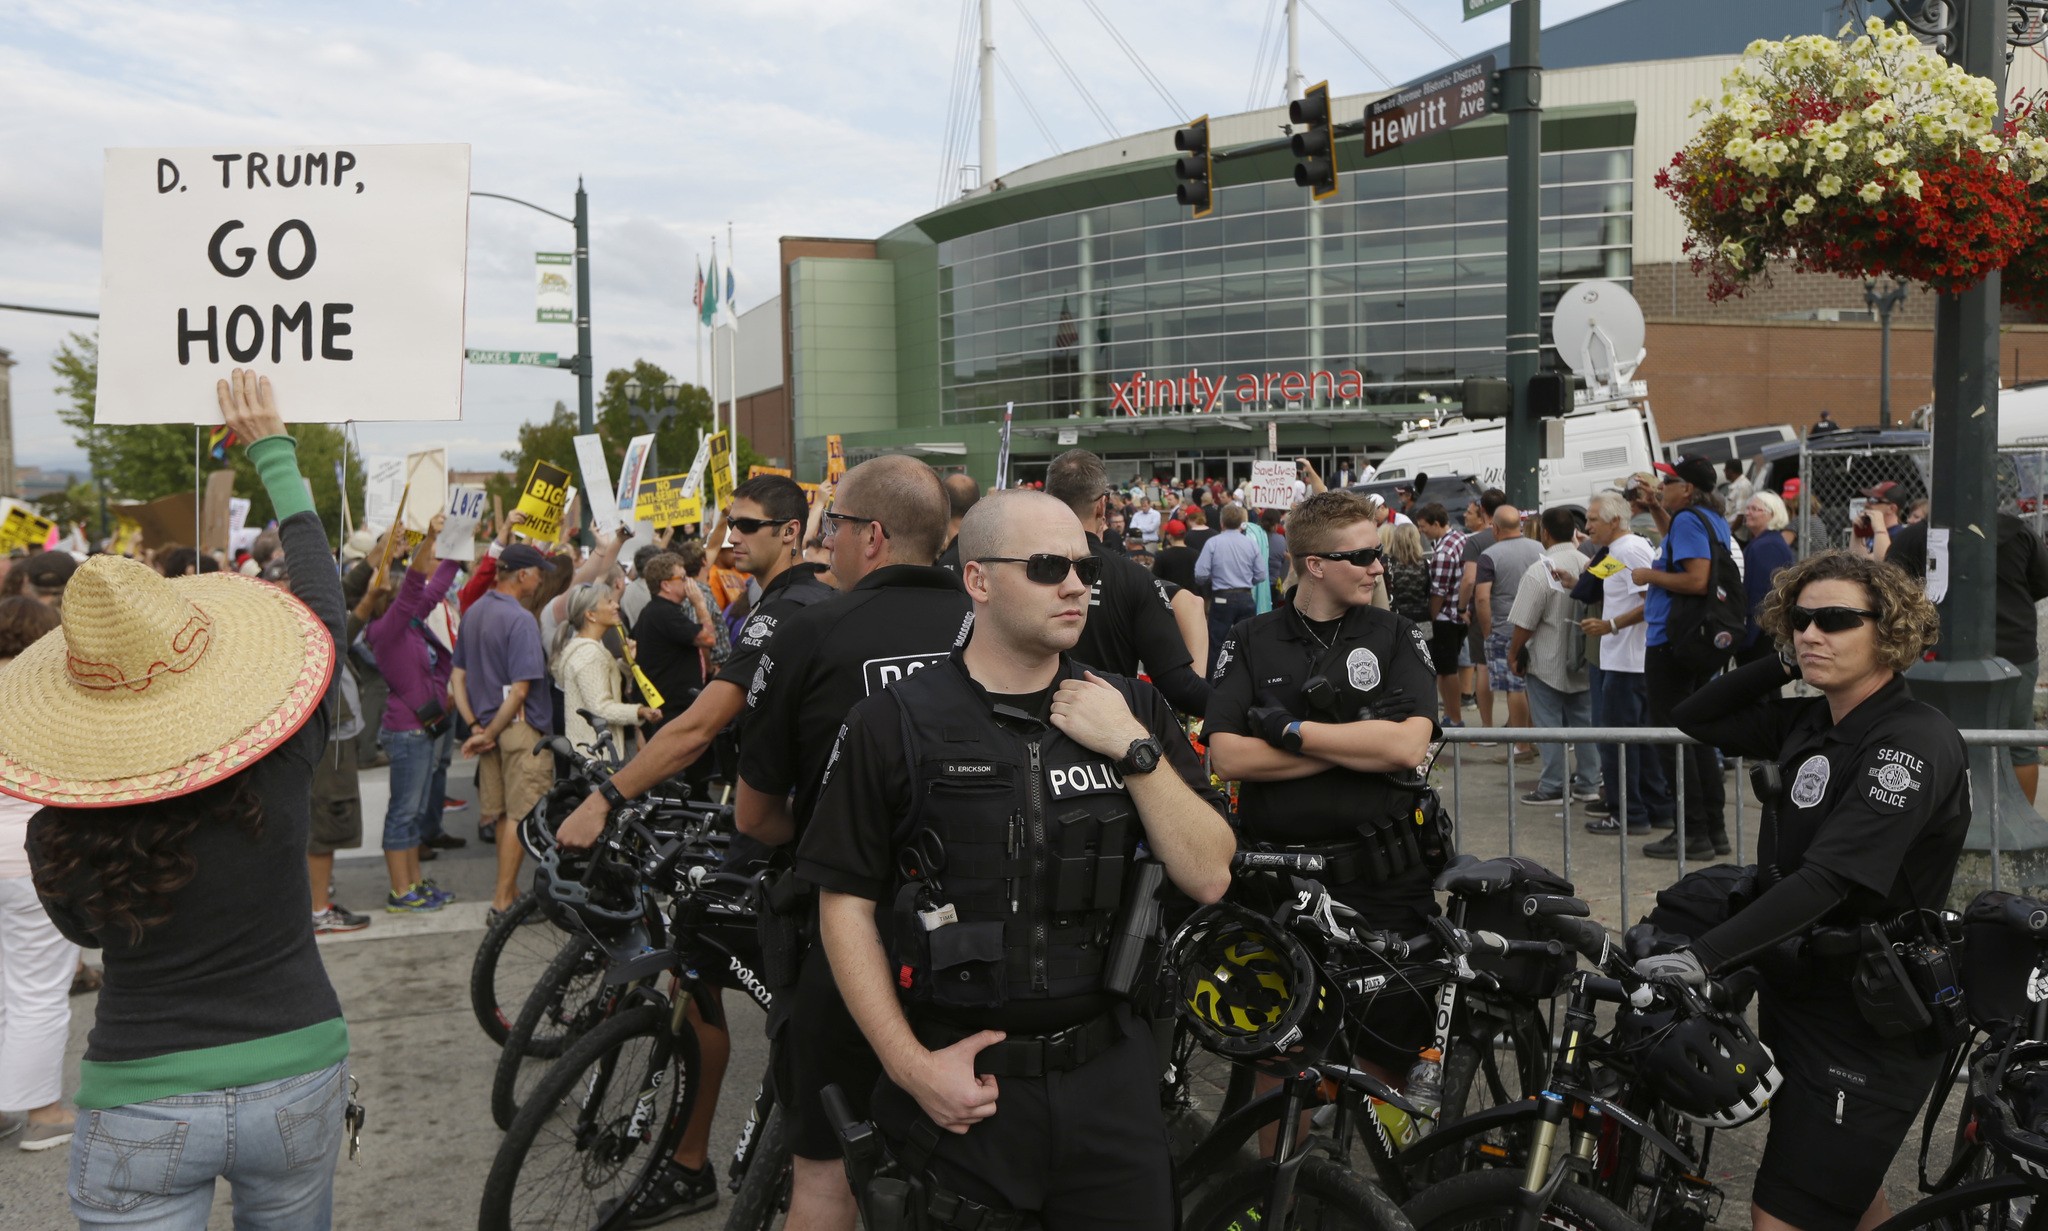 Seattle police officers stand watch near protesters outside a rally for Republican presidential candidate Donald Trump in Everett. (Ted S. Warren/The Associated Press)